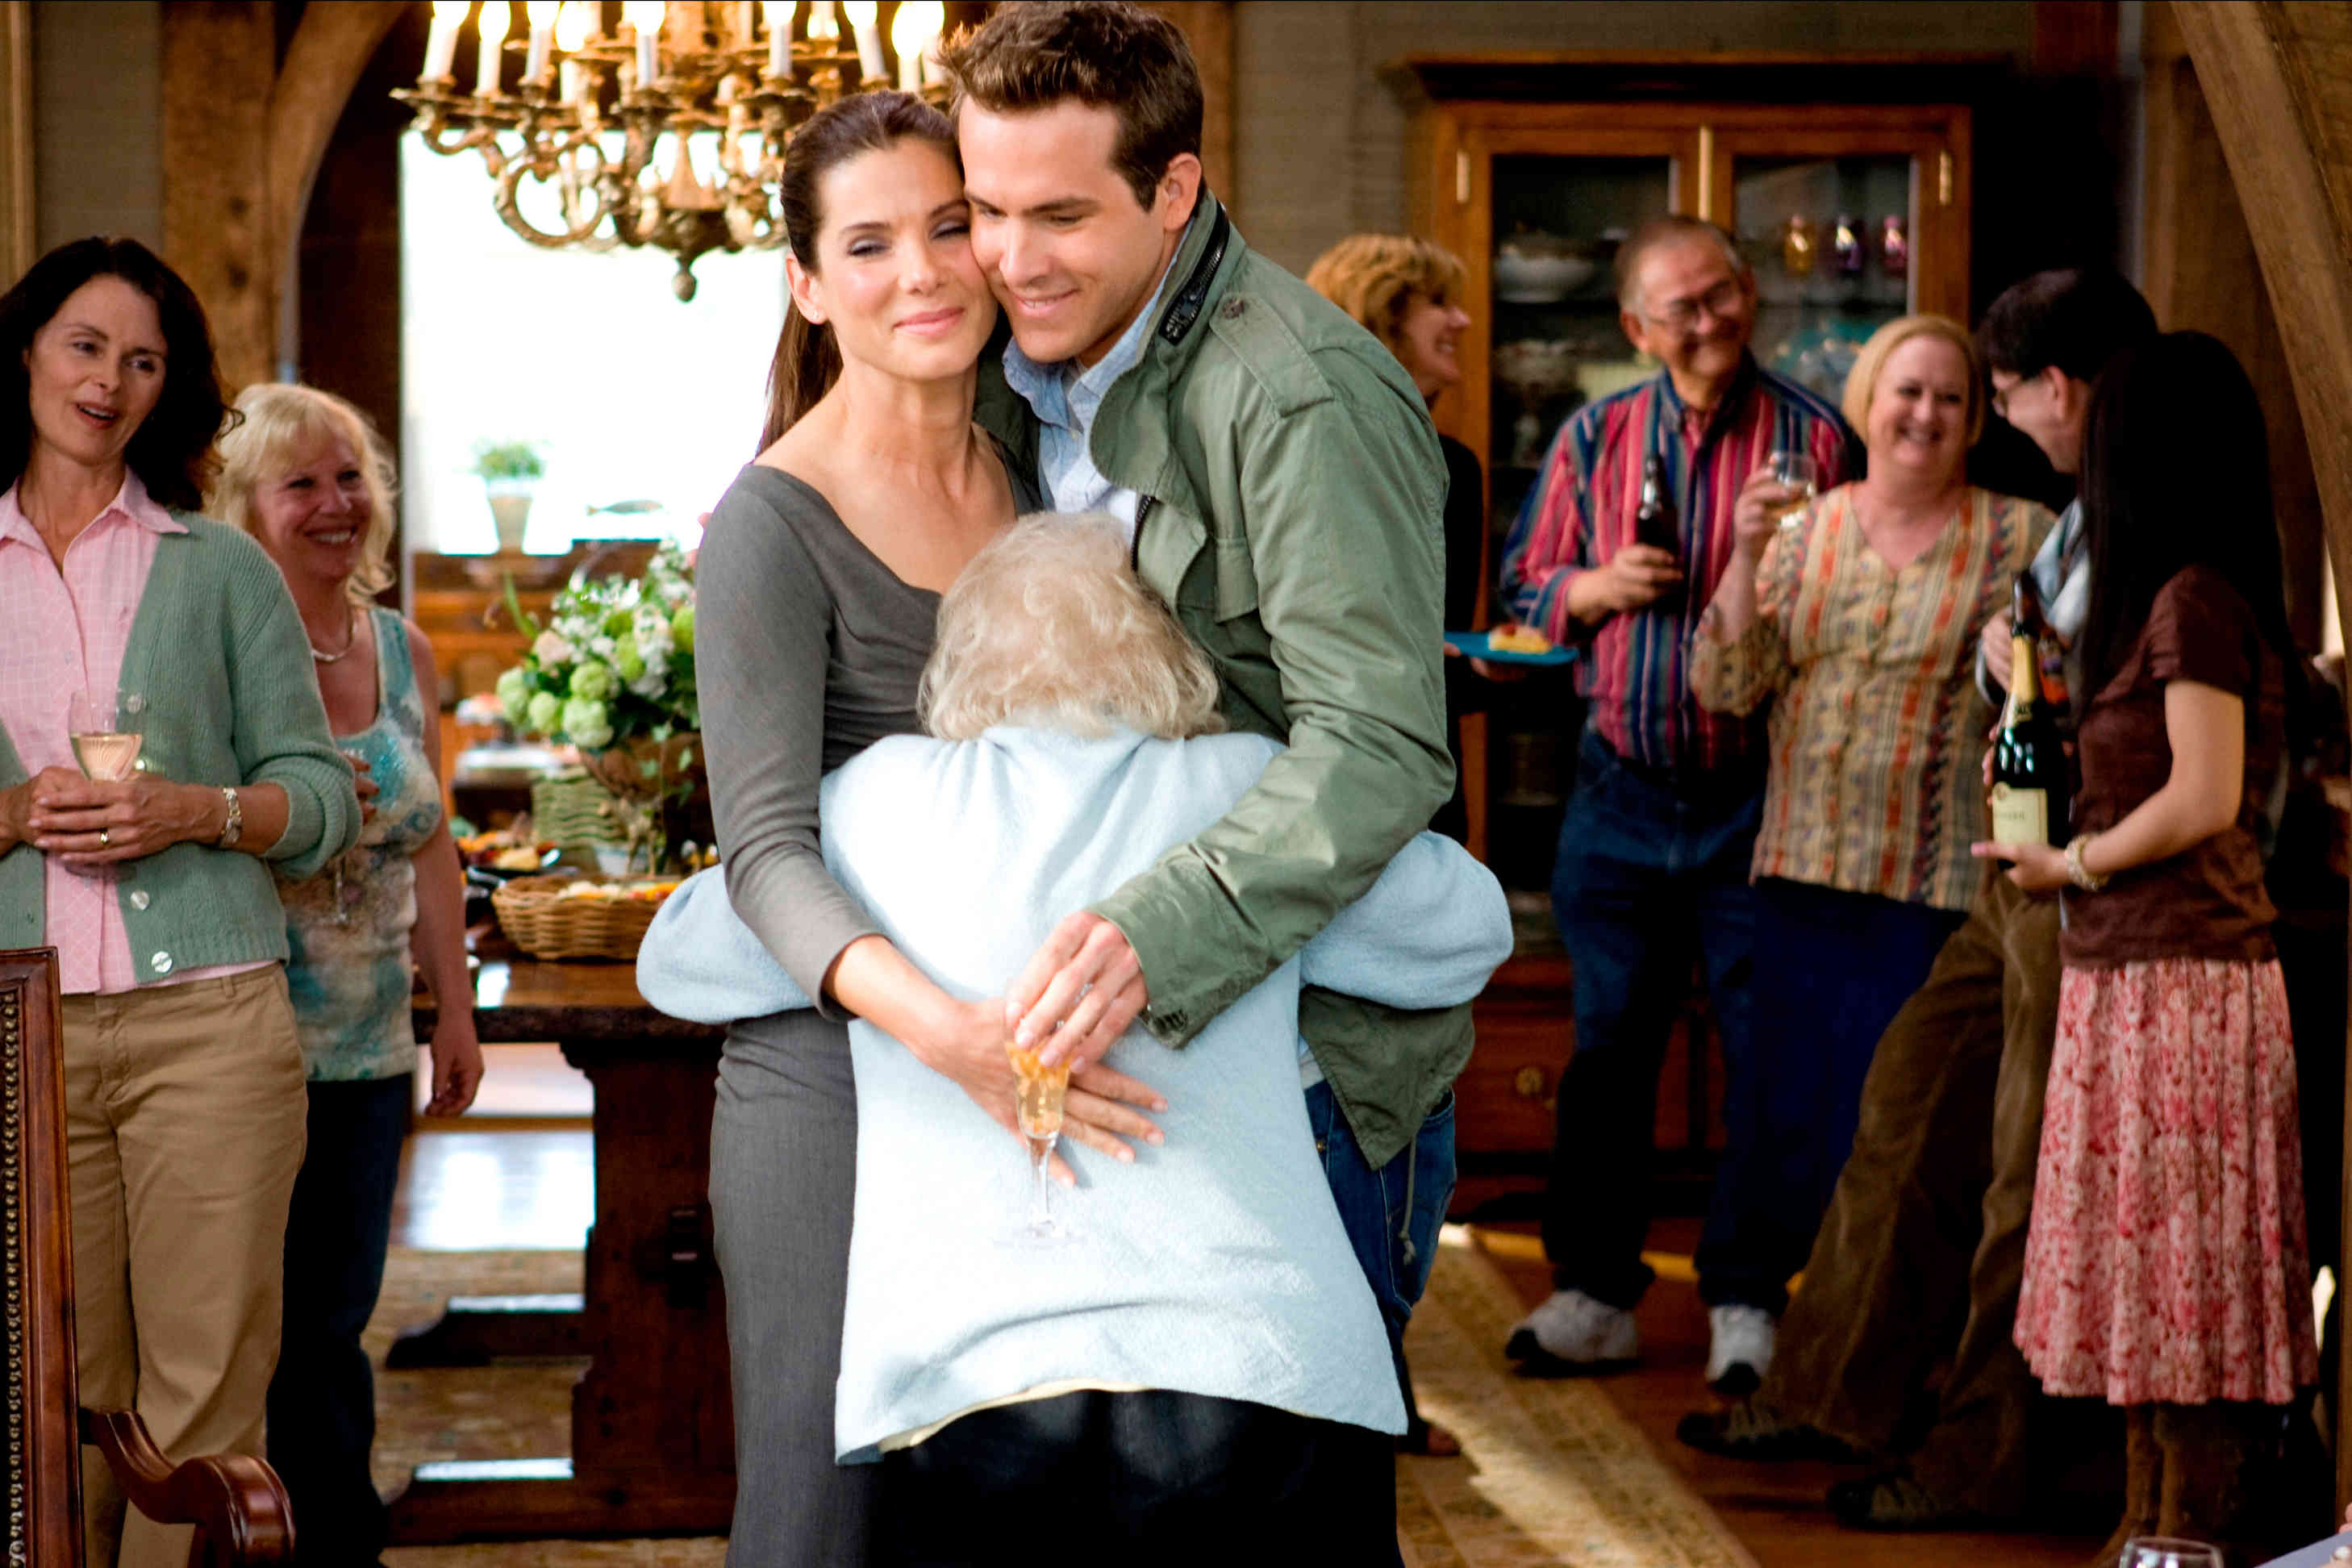 Can You Name These 2000s Romantic Comedy Movies? The Proposal